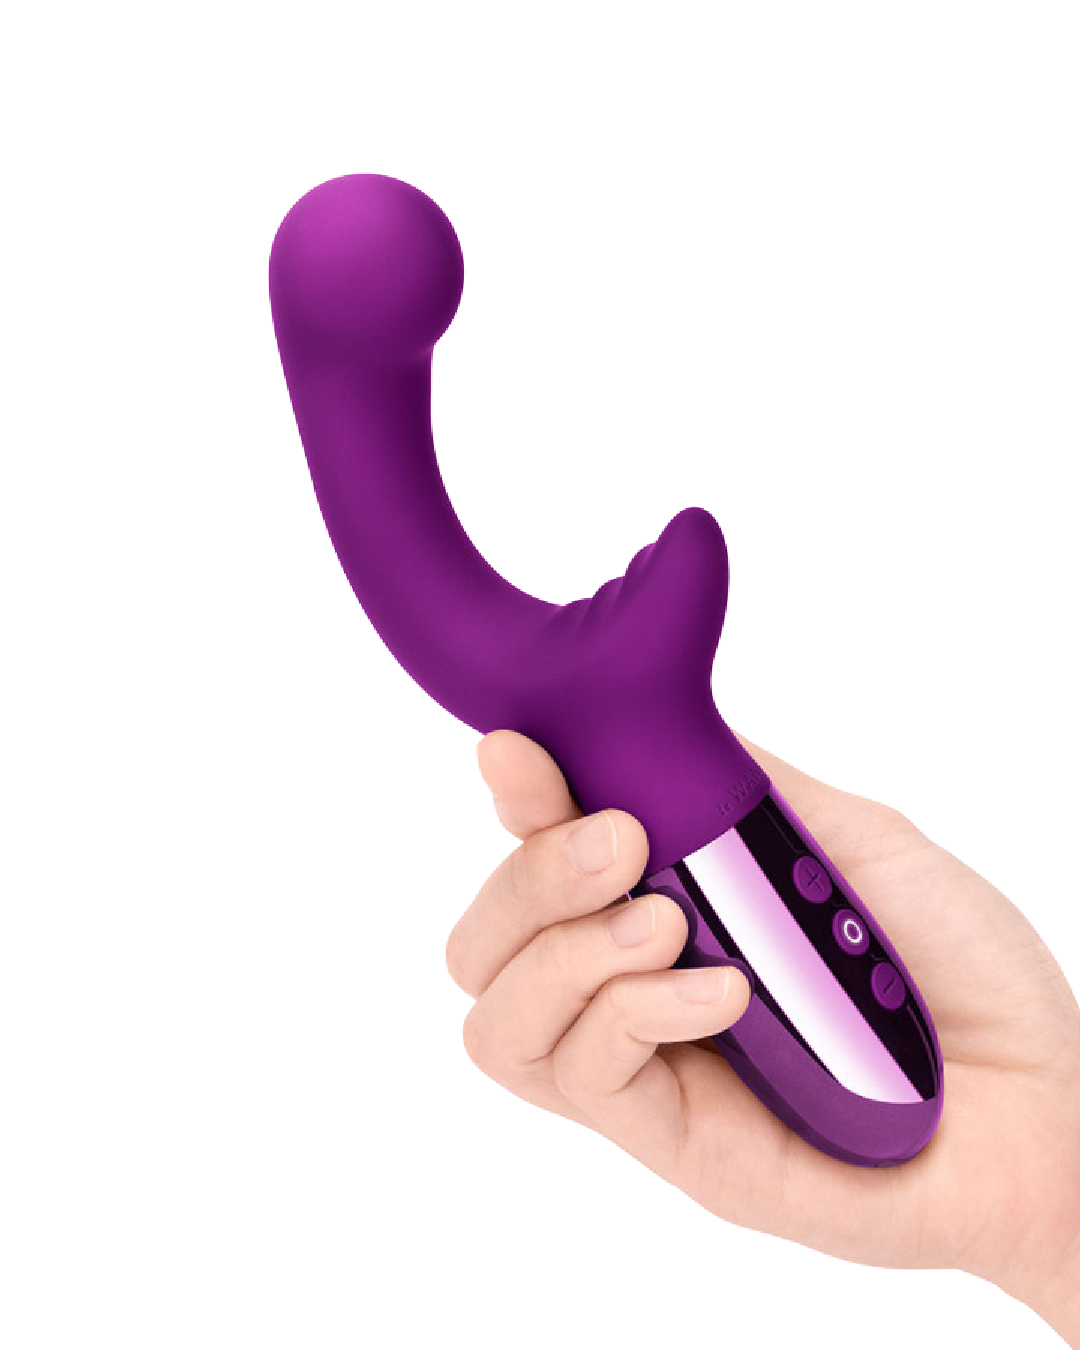 Le Wand XO Double Motor Internal and External Vibrator - Dark Cherry held in a hand